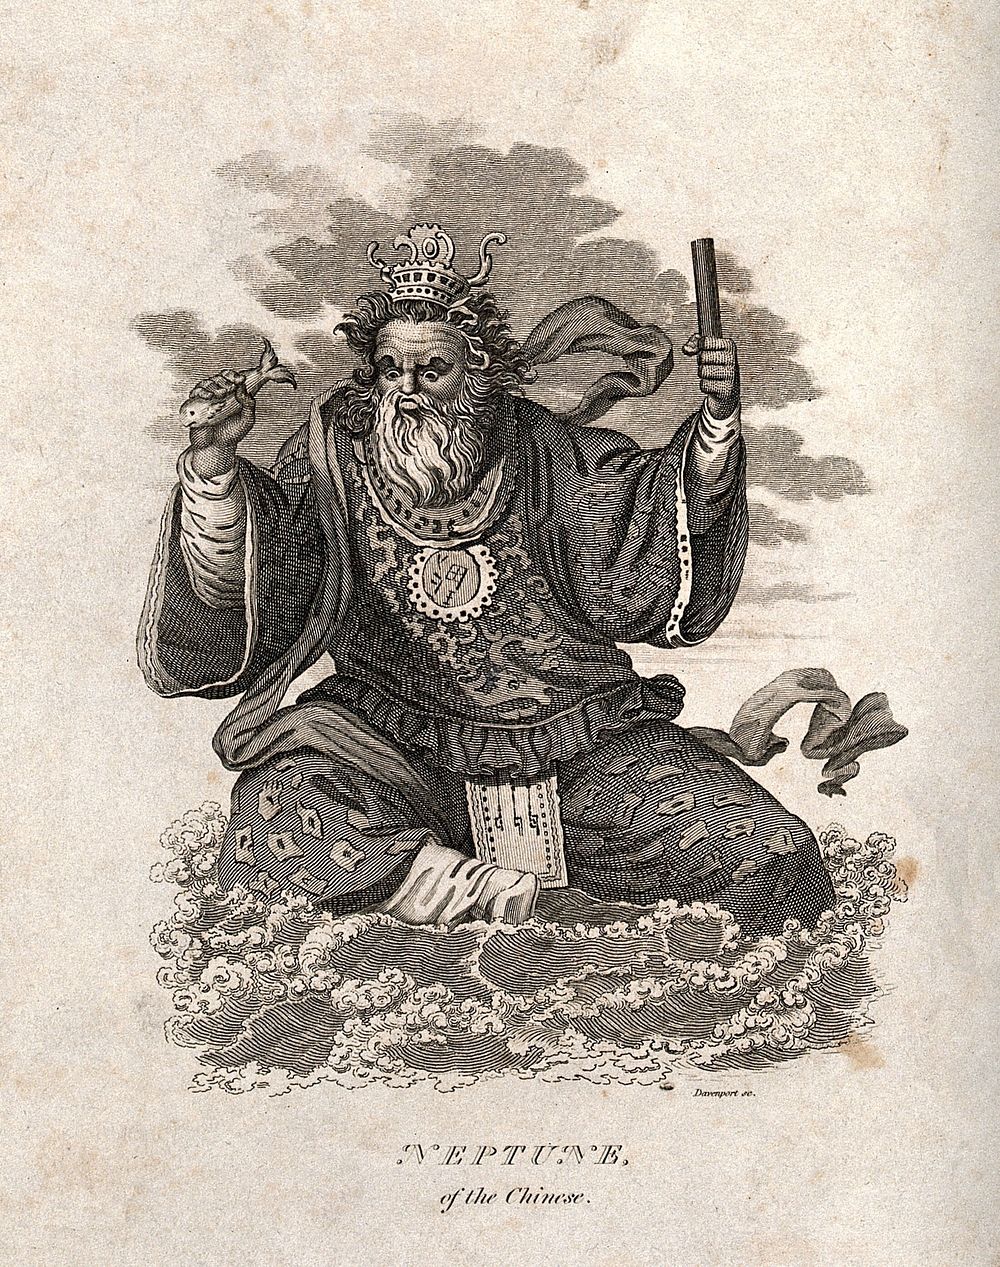 "Neptune of the Chinese". Etching by Davenport.